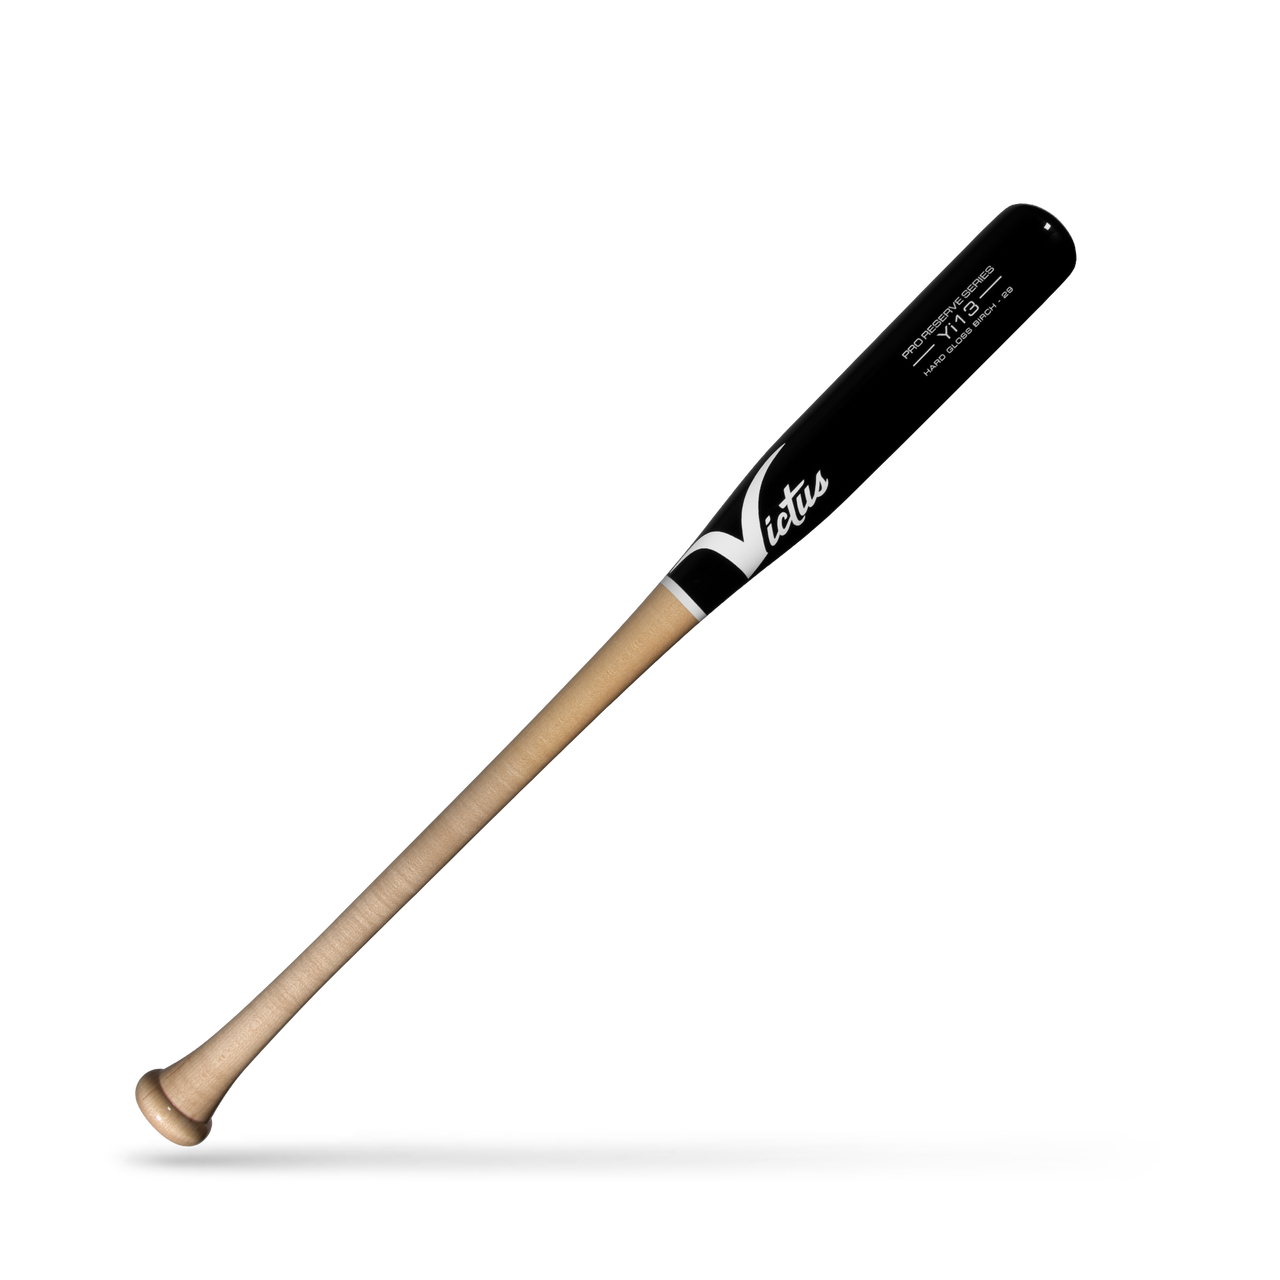 victus-pro-reserve-birch-yi13-youth-wood-baseball-bat-31-inch VYRWBYI13-NBK-31   <div class=productView-description> <h1 class=productView-title-lower>YI13 YOUTH BIRCH PRO RESERVE</h1> <p><span>Modeled after the